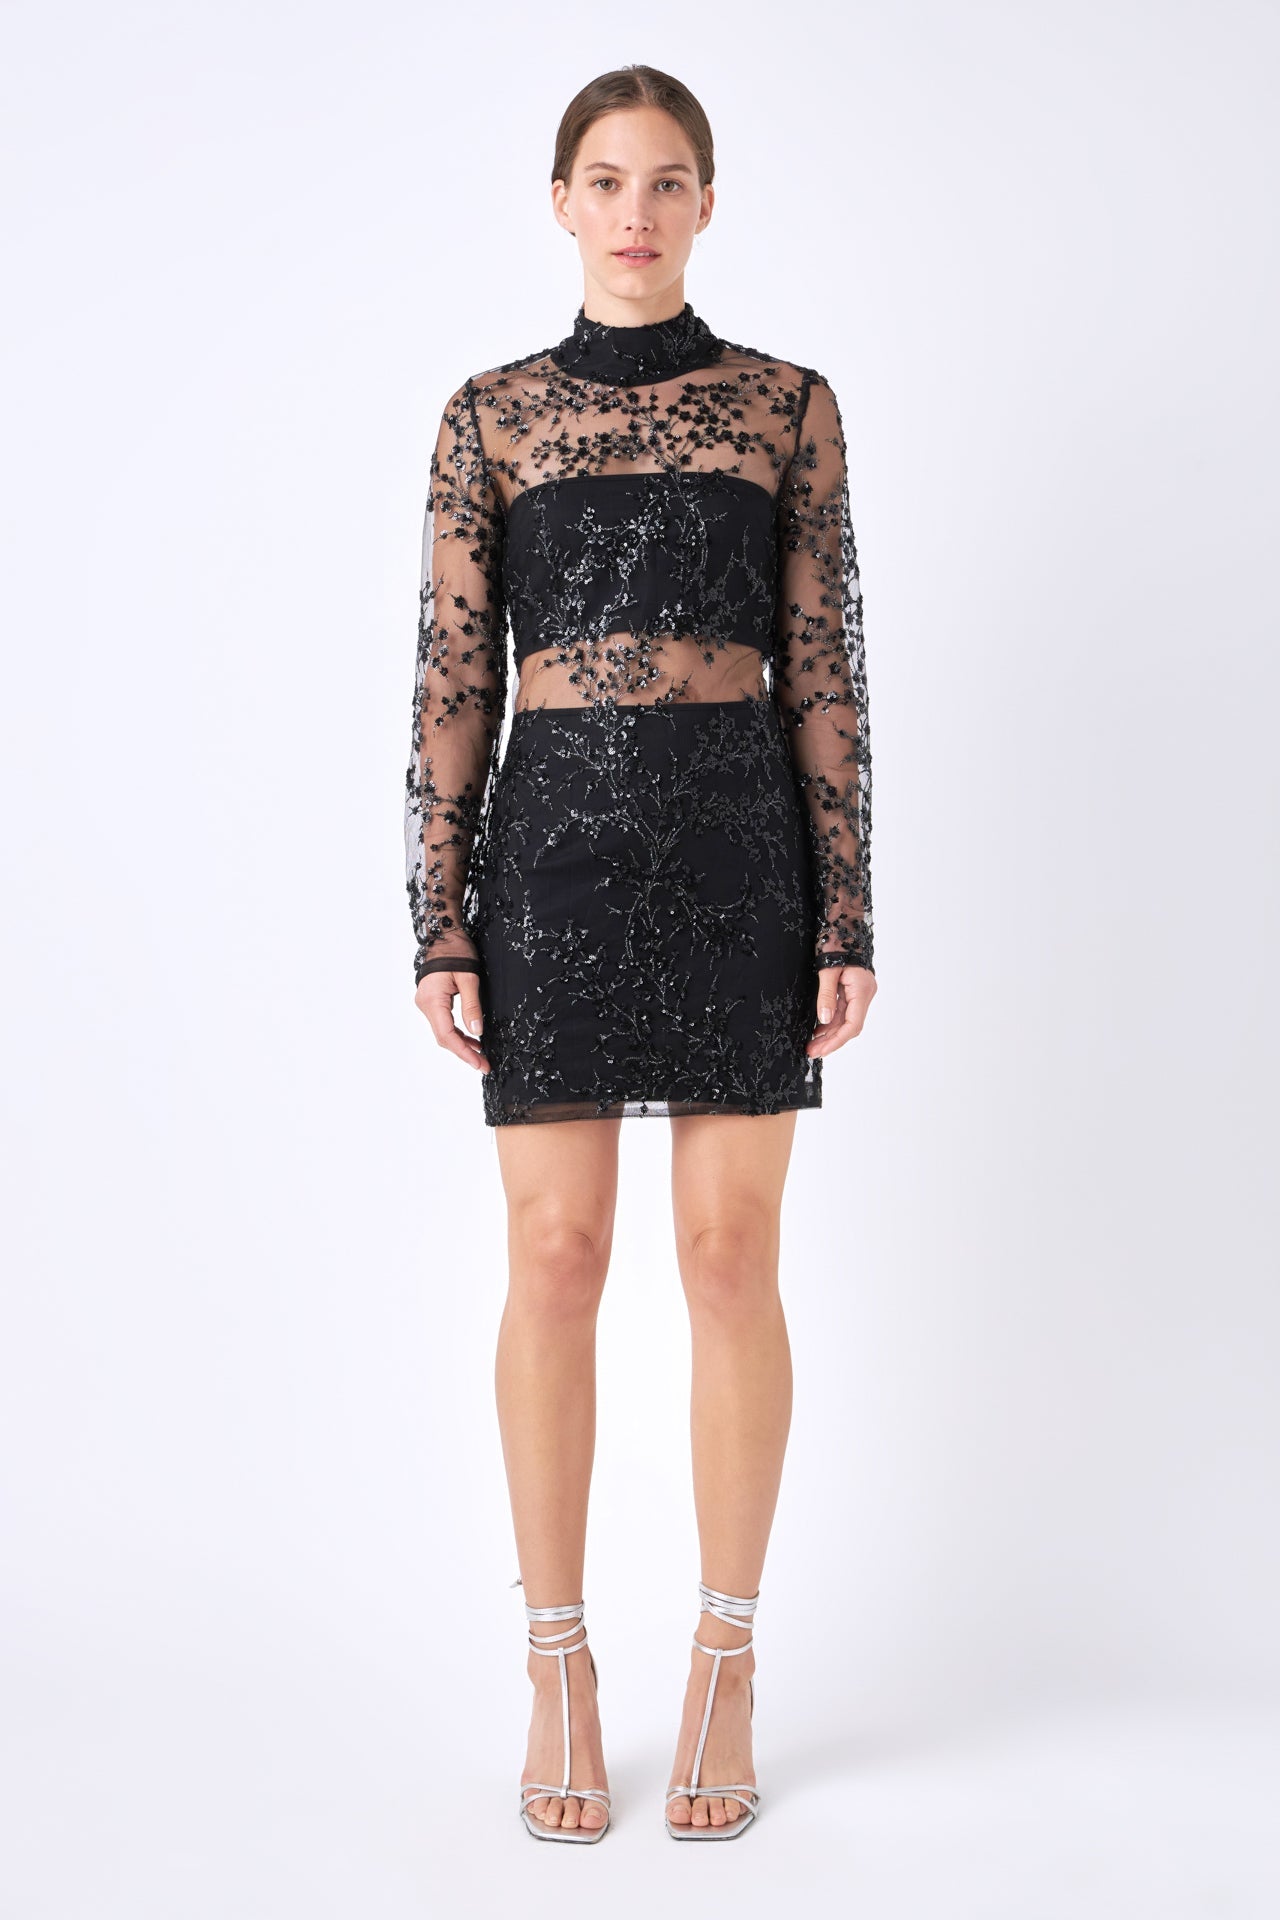 Endless Rose - Sequins Embroidered Mini Dress - Dresses in Women's Clothing available at endlessrose.com